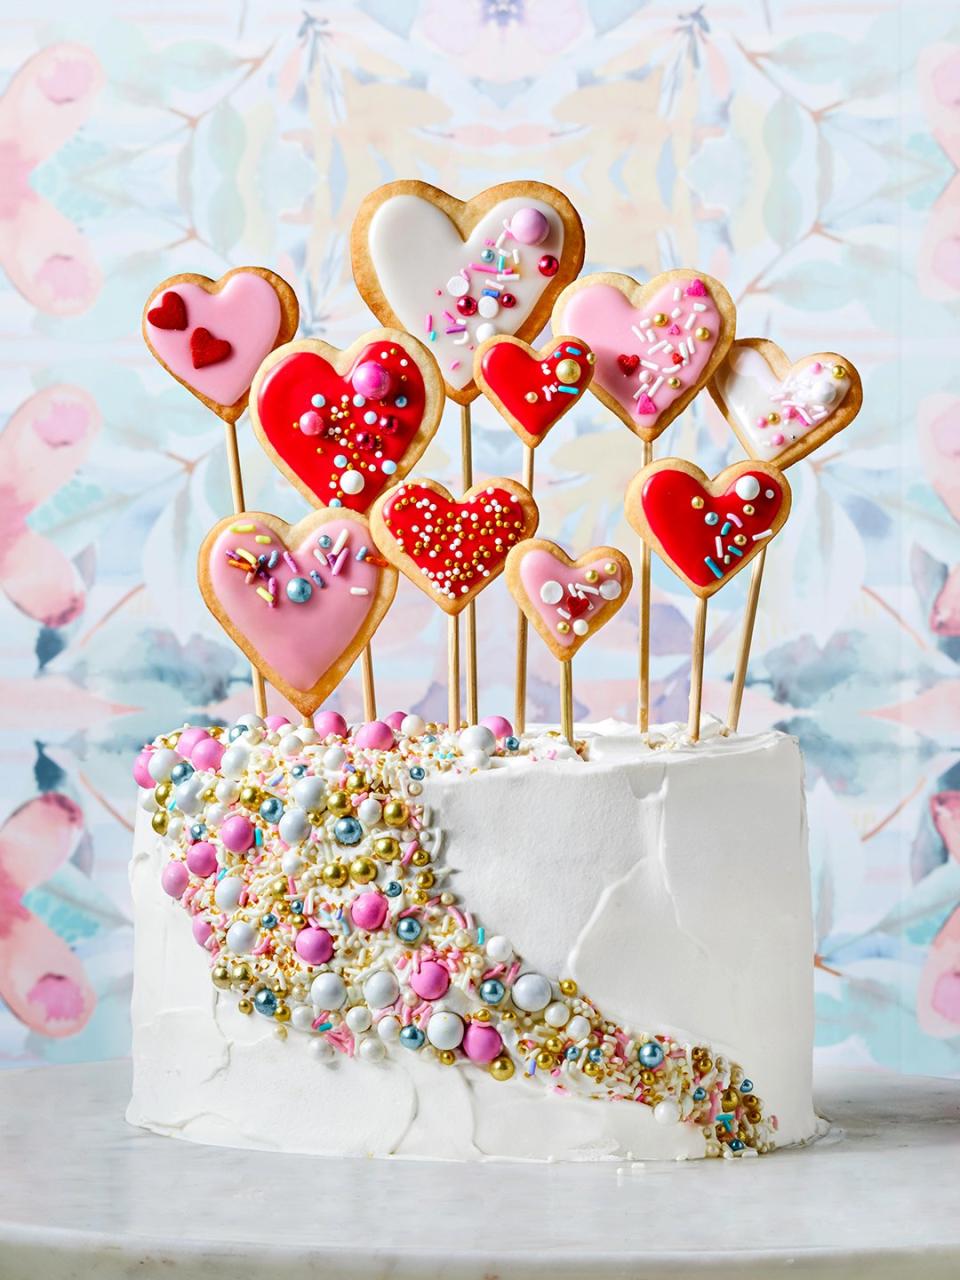 Sweeten your Valentine's Day with a scrumptious, romantic, or heart-shape dessert recipe. Whether your sweetie likes rich chocolate desserts, berry pies, or creme brulee, you're sure to win hearts with a delicious Valentine's Day dessert.